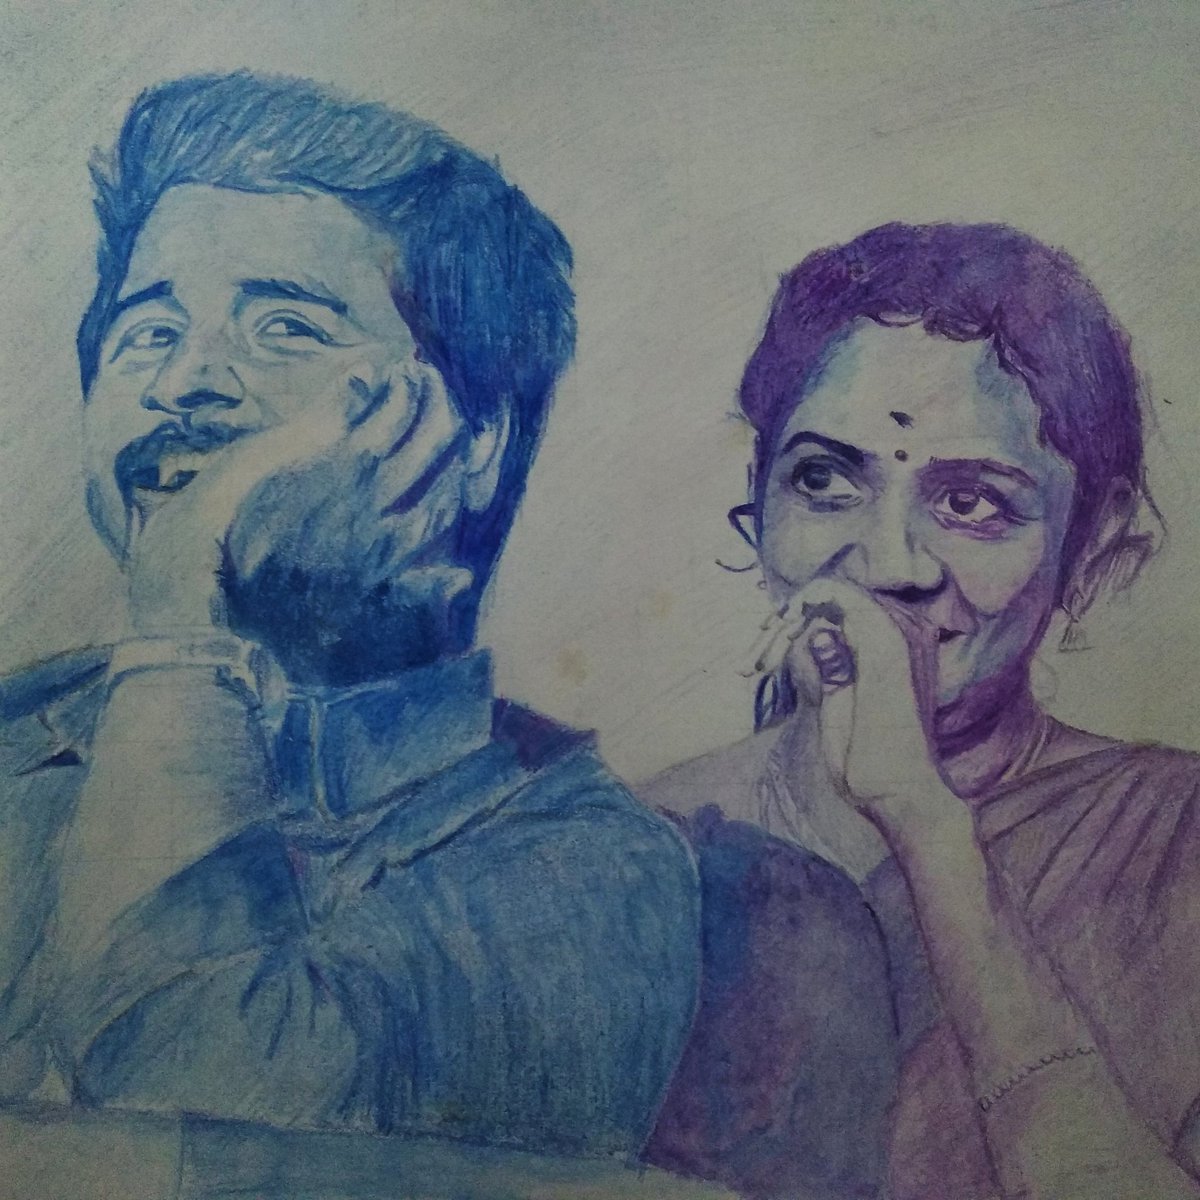 Fans arts for cutest couple  @Siva_Kartikeyan annaFirst art:  @AnjanaRasigaiSec art:  @artzzz_passion3rd art also : @artzzz_passion4th  @sksisskn( note : enaku kidacha drawing ithane so don't mistake others)Others anna anni drawing panniruntha just command in my thread 